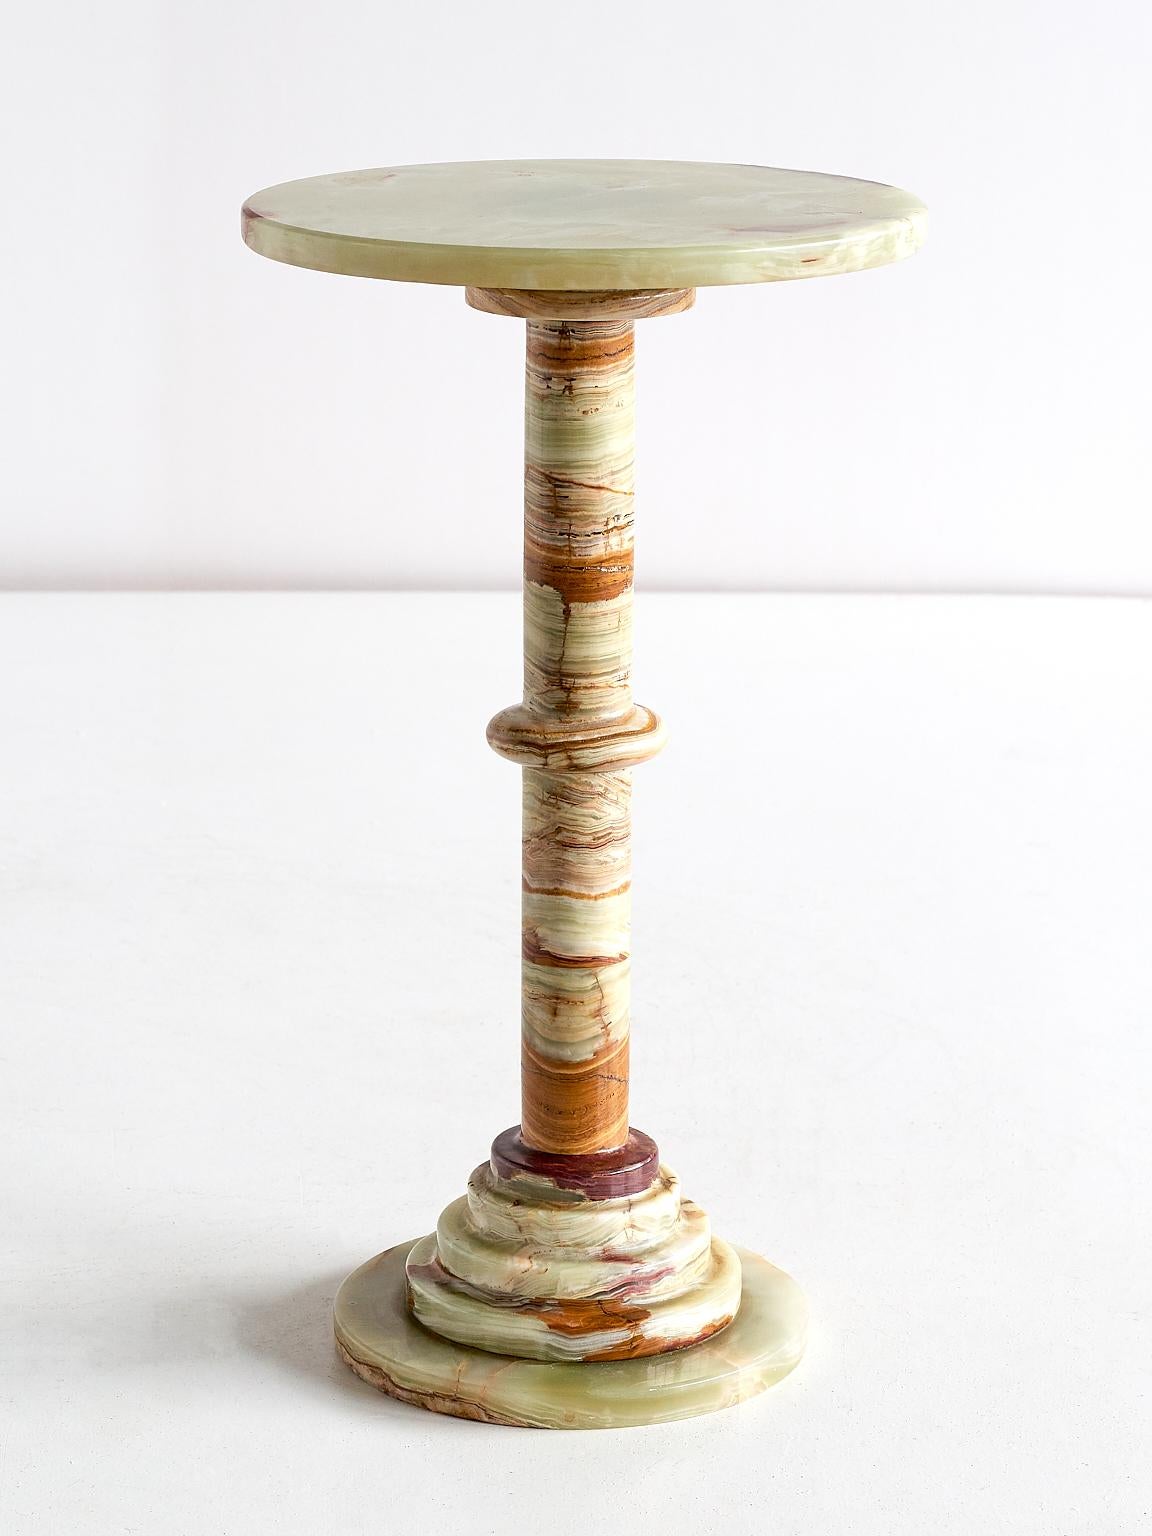 This elegant side table was produced in Italy in the 1960s. The pedestal base and top are all made of multicolored onyx. The different hues and intensities of red, white and green give the table a refined and striking appearance.